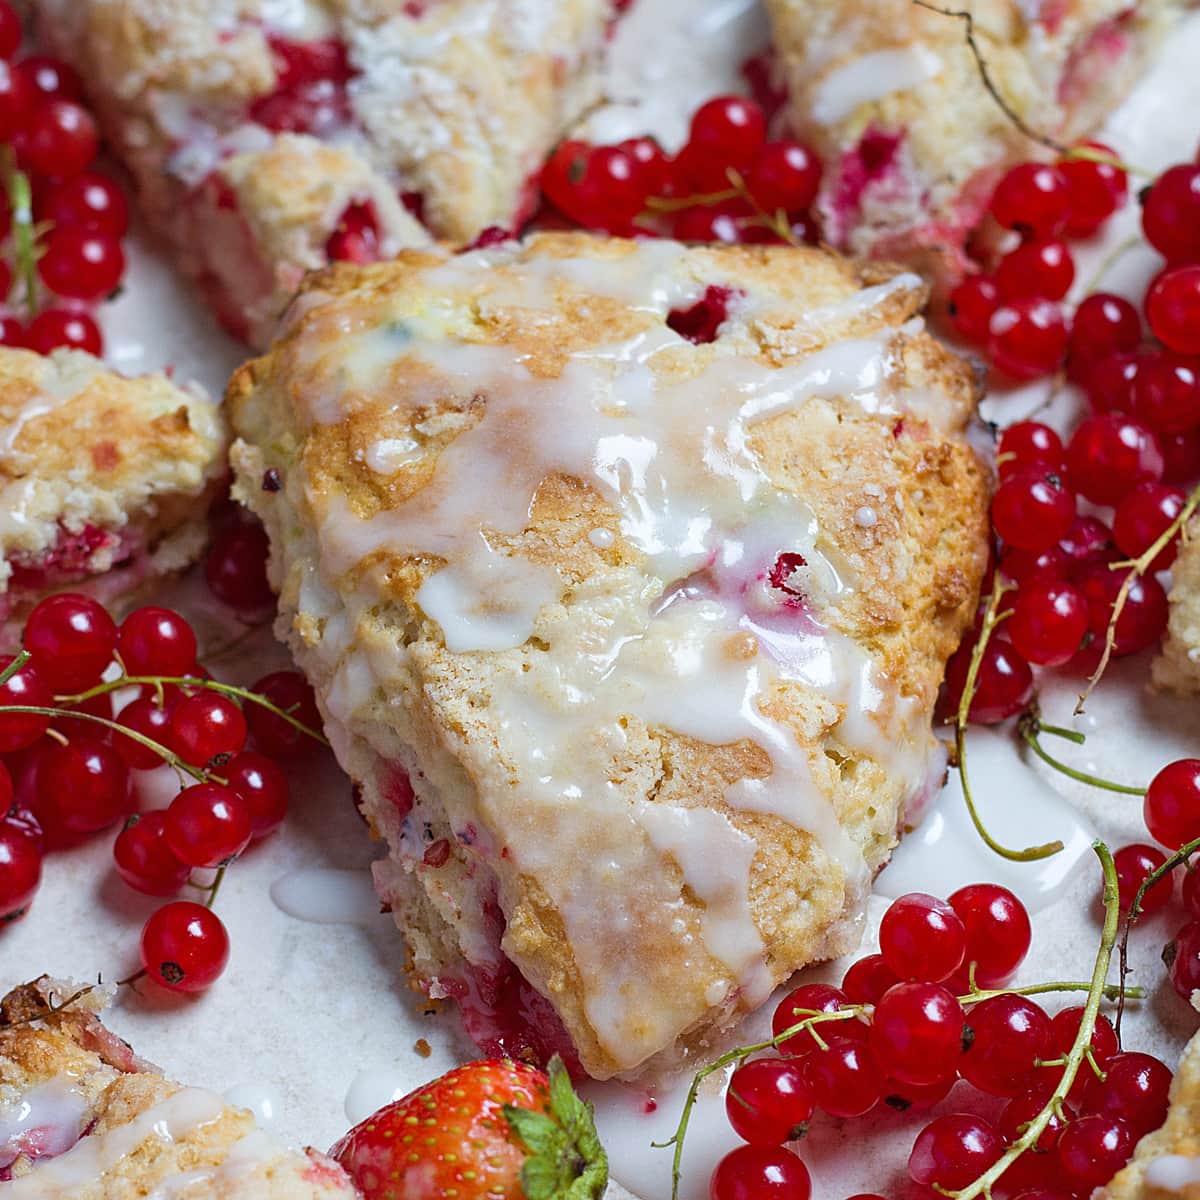 Dessert Strawberry scones with red currants.